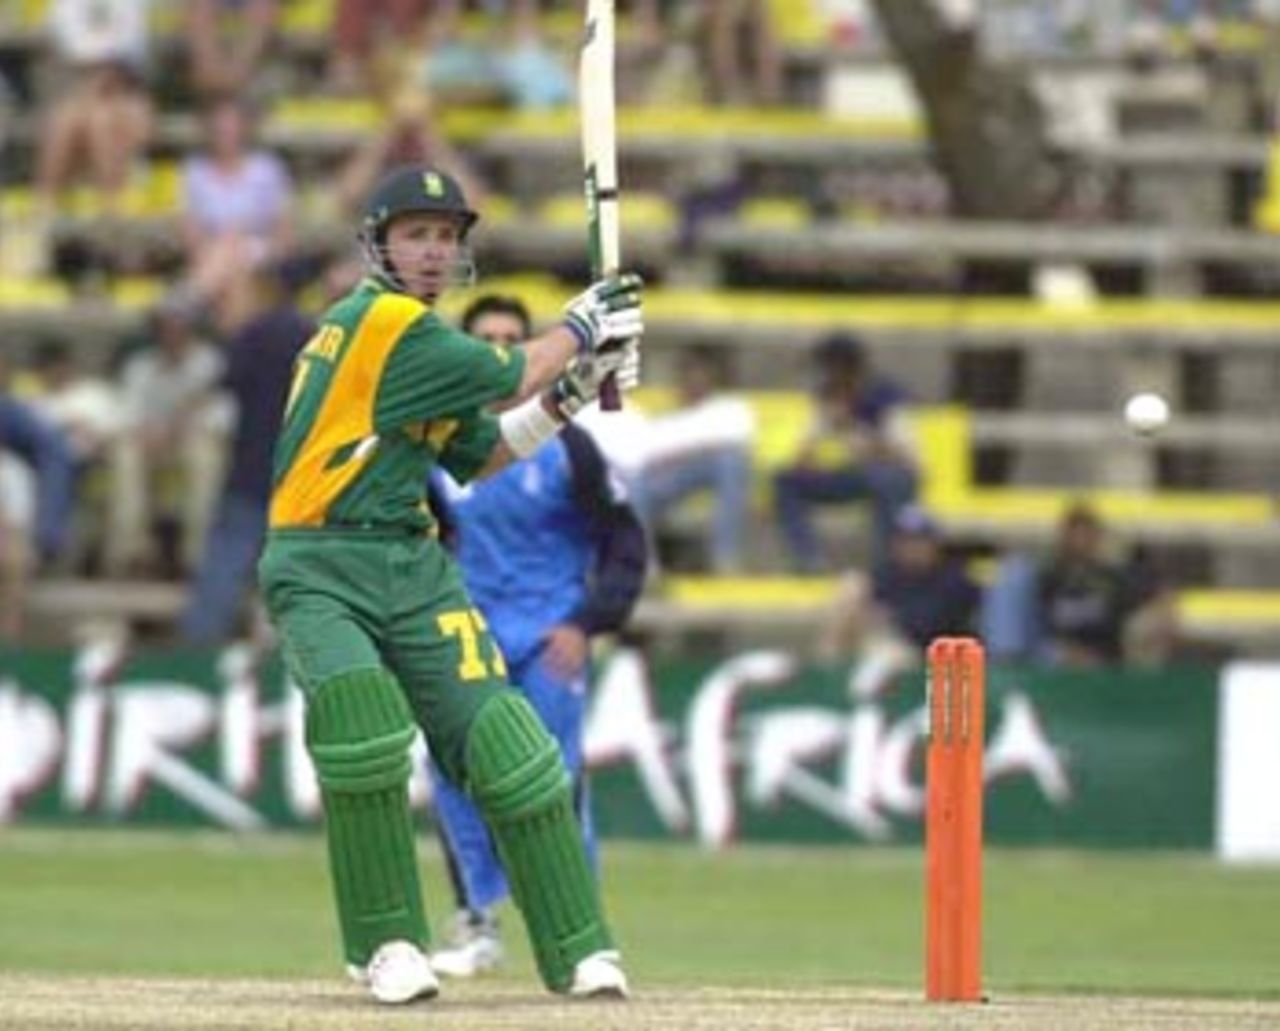 Dippenaar pulls the ball to square off the wicket on the onside. ICC KnockOut 2000/01, 4th Quarter Final, England v South Africa Gymkhana Club Ground, Nairobi, 10 October 2000